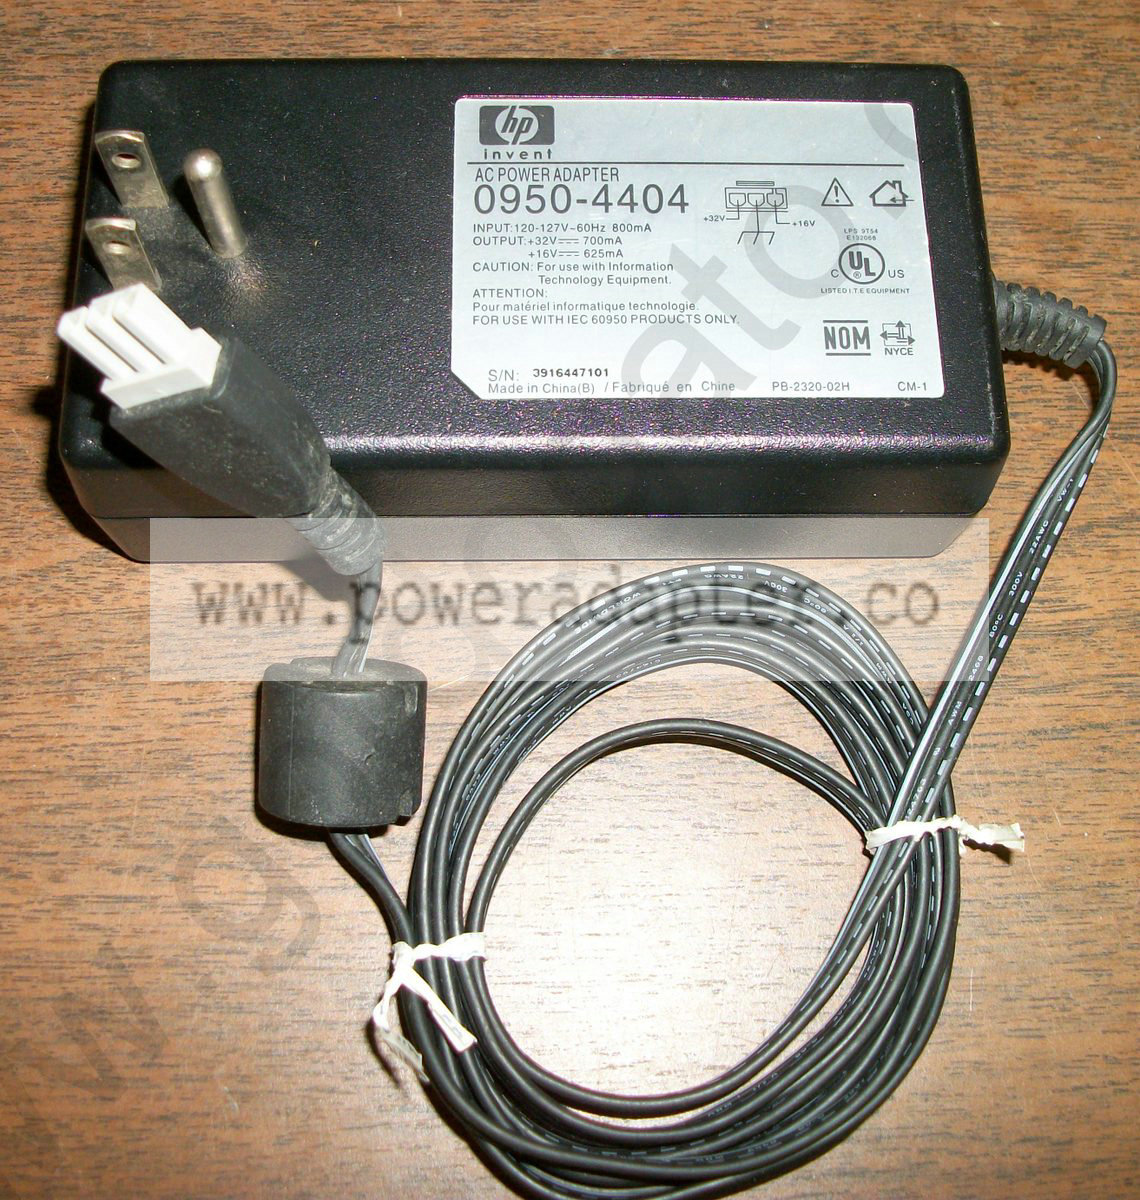 HP AC Power Adapter - 0950-4404 - 32V, 16V DC [0950-4404] This AC adapter is for use with some HP printers. Input: 120